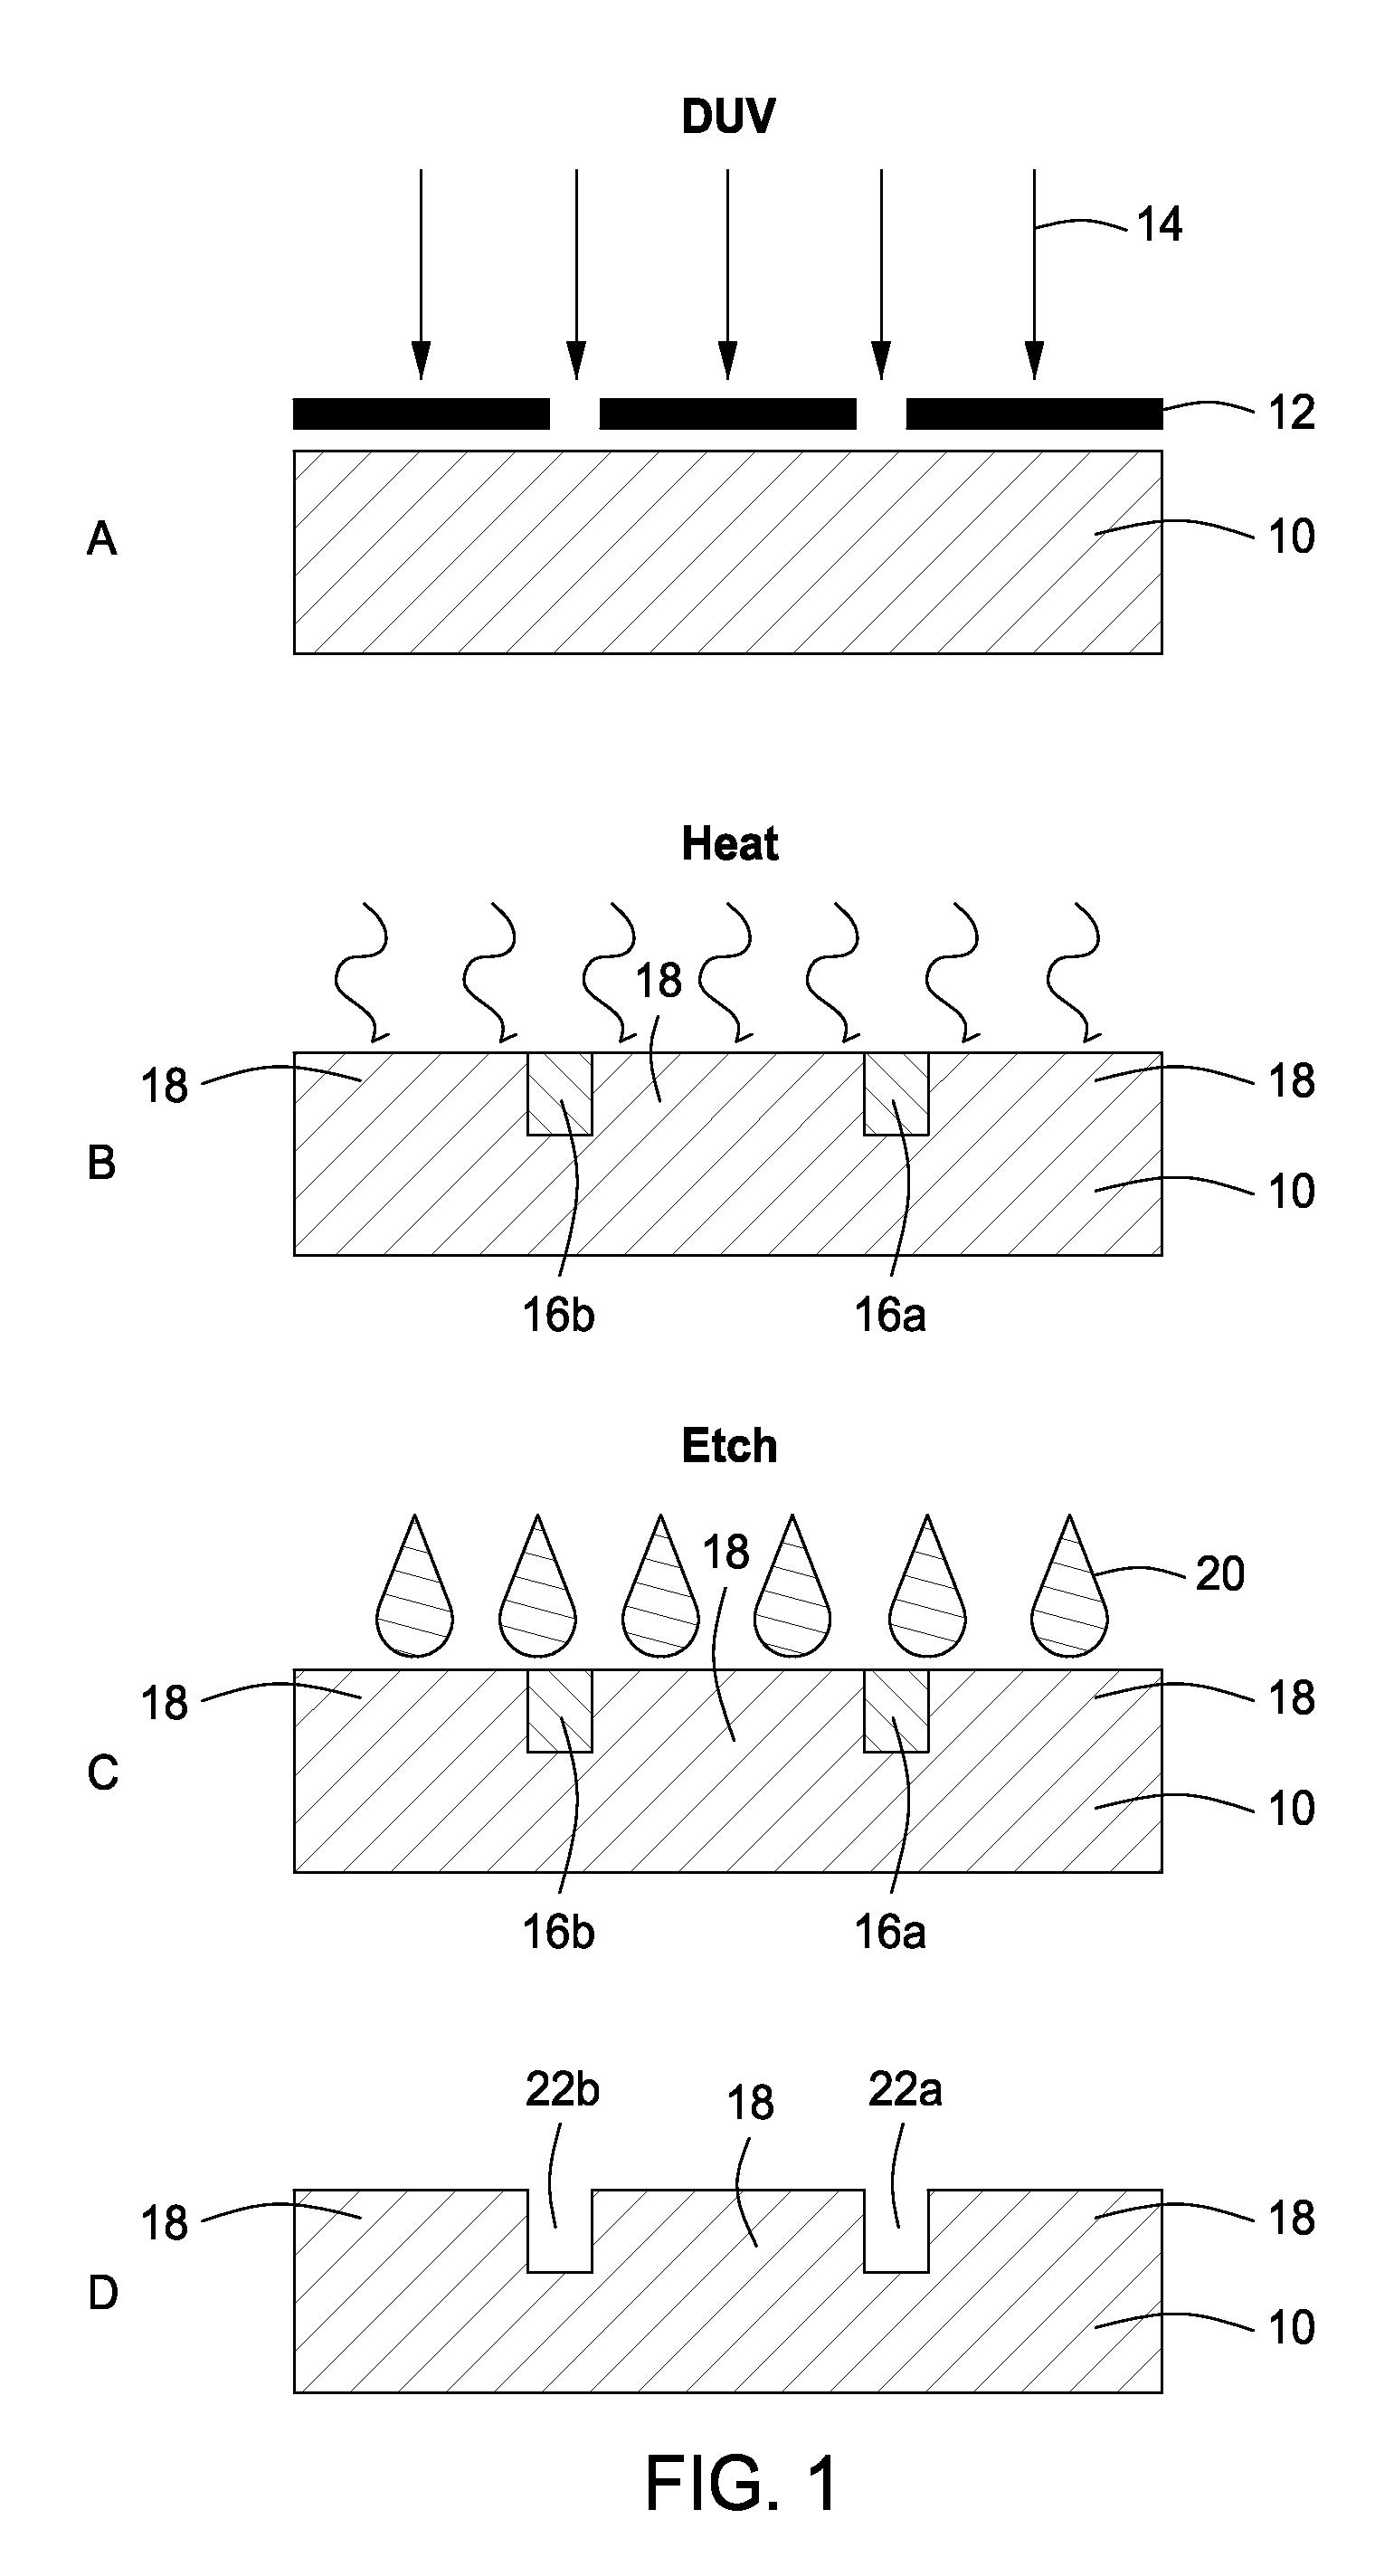 Compositions and methods to fabricate a photoactive substrate suitable for shaped glass structures